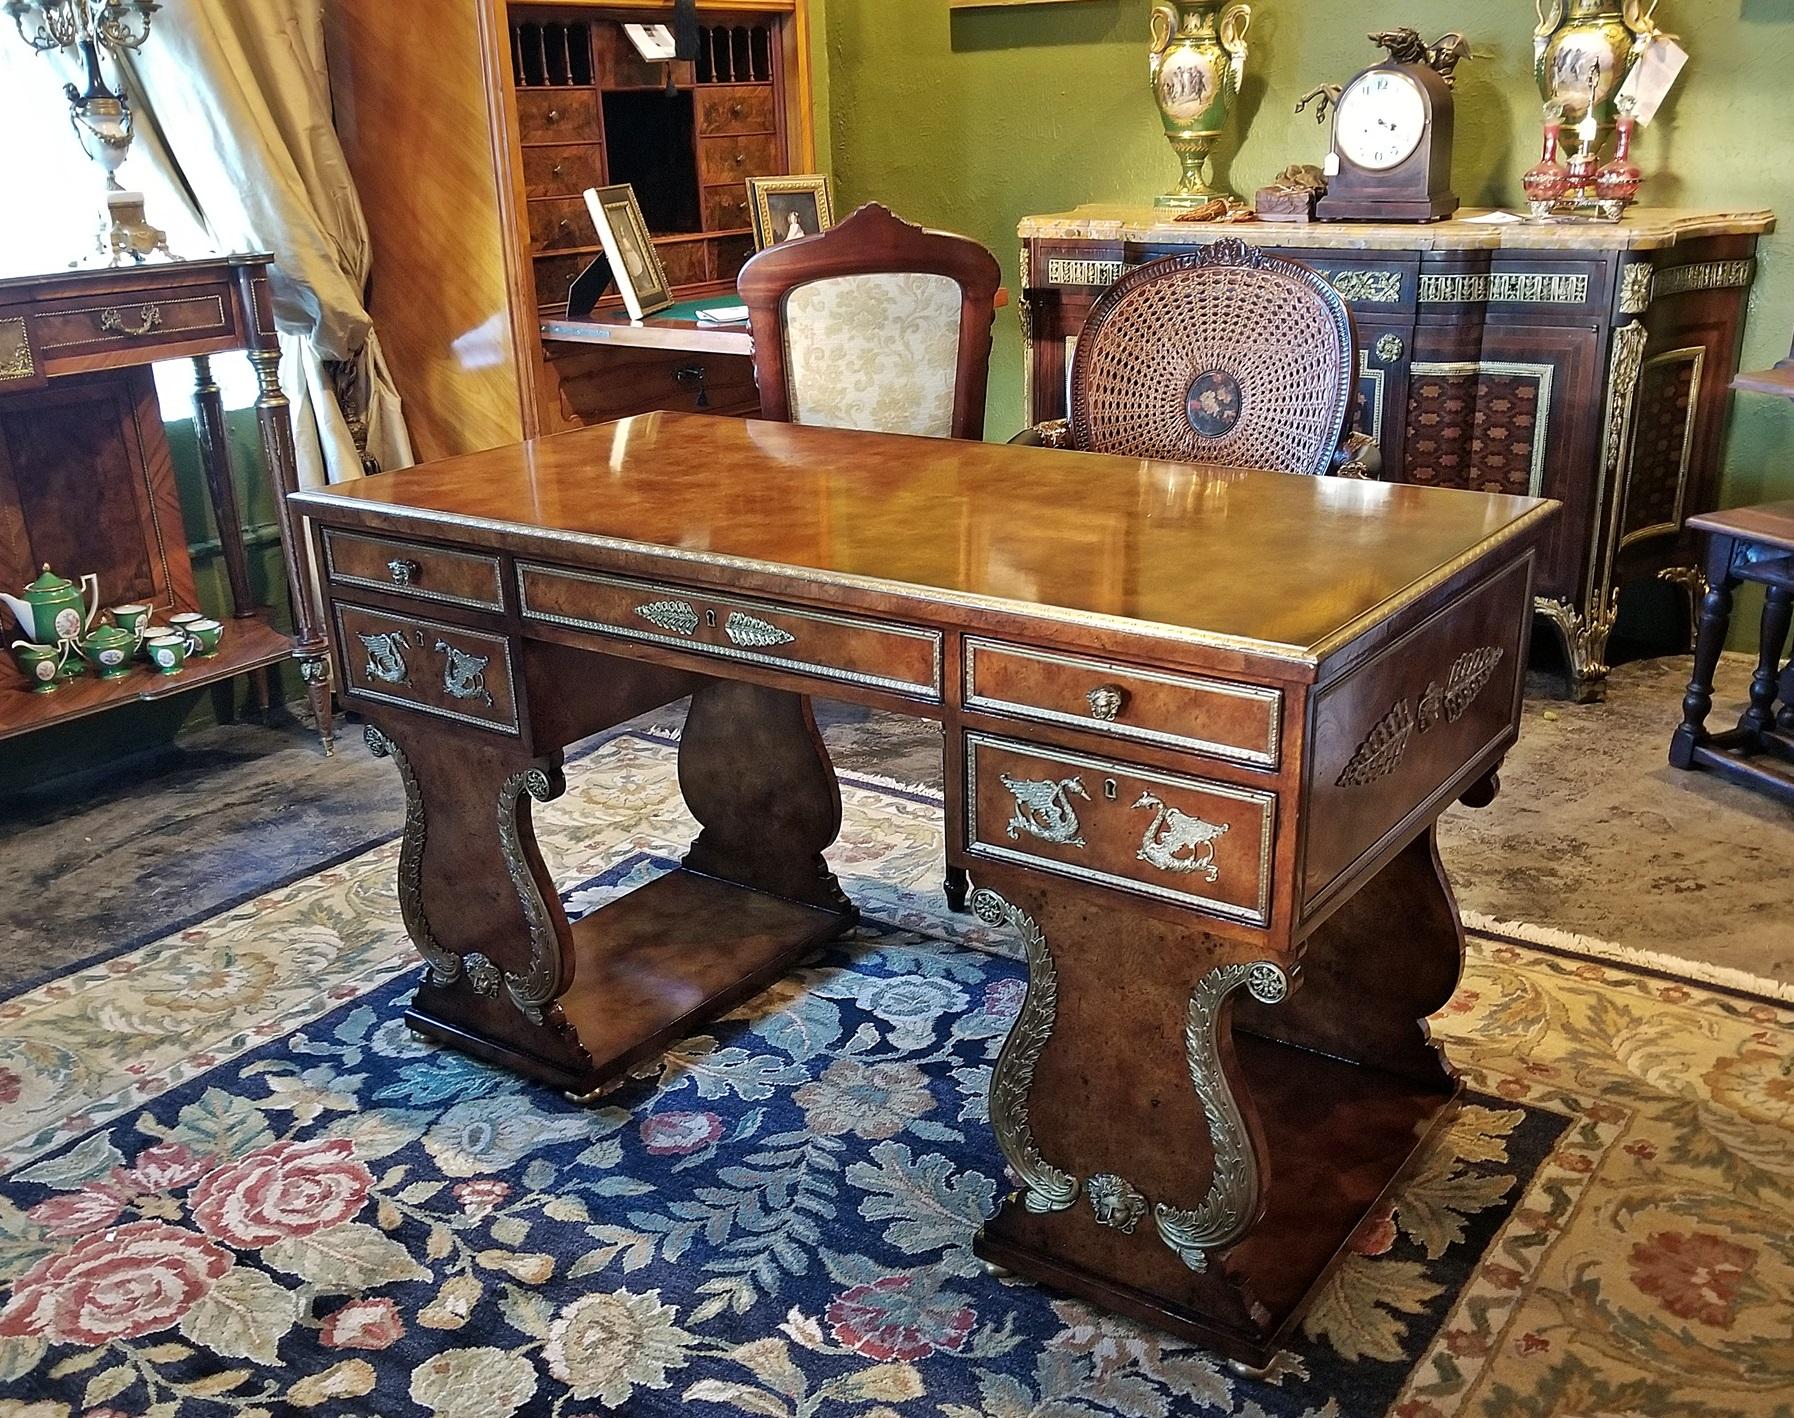 Presenting an absolutely gorgeous 20th century Replica of 'The Tsar Desk' from the Gianni Versace Collection by Theodore Alexander of NY.
Firstly, in this industry there are 4 categories:- (1) Original period antiques, (2) 